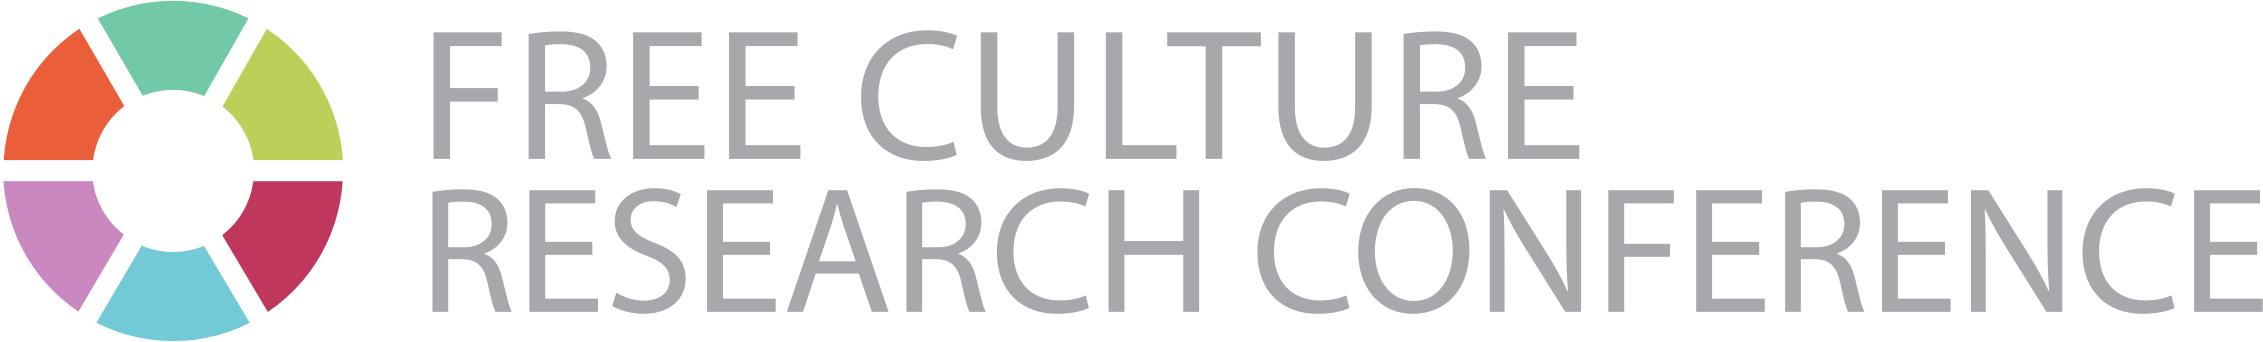 Free Culture Research Conference Logo 2 icons